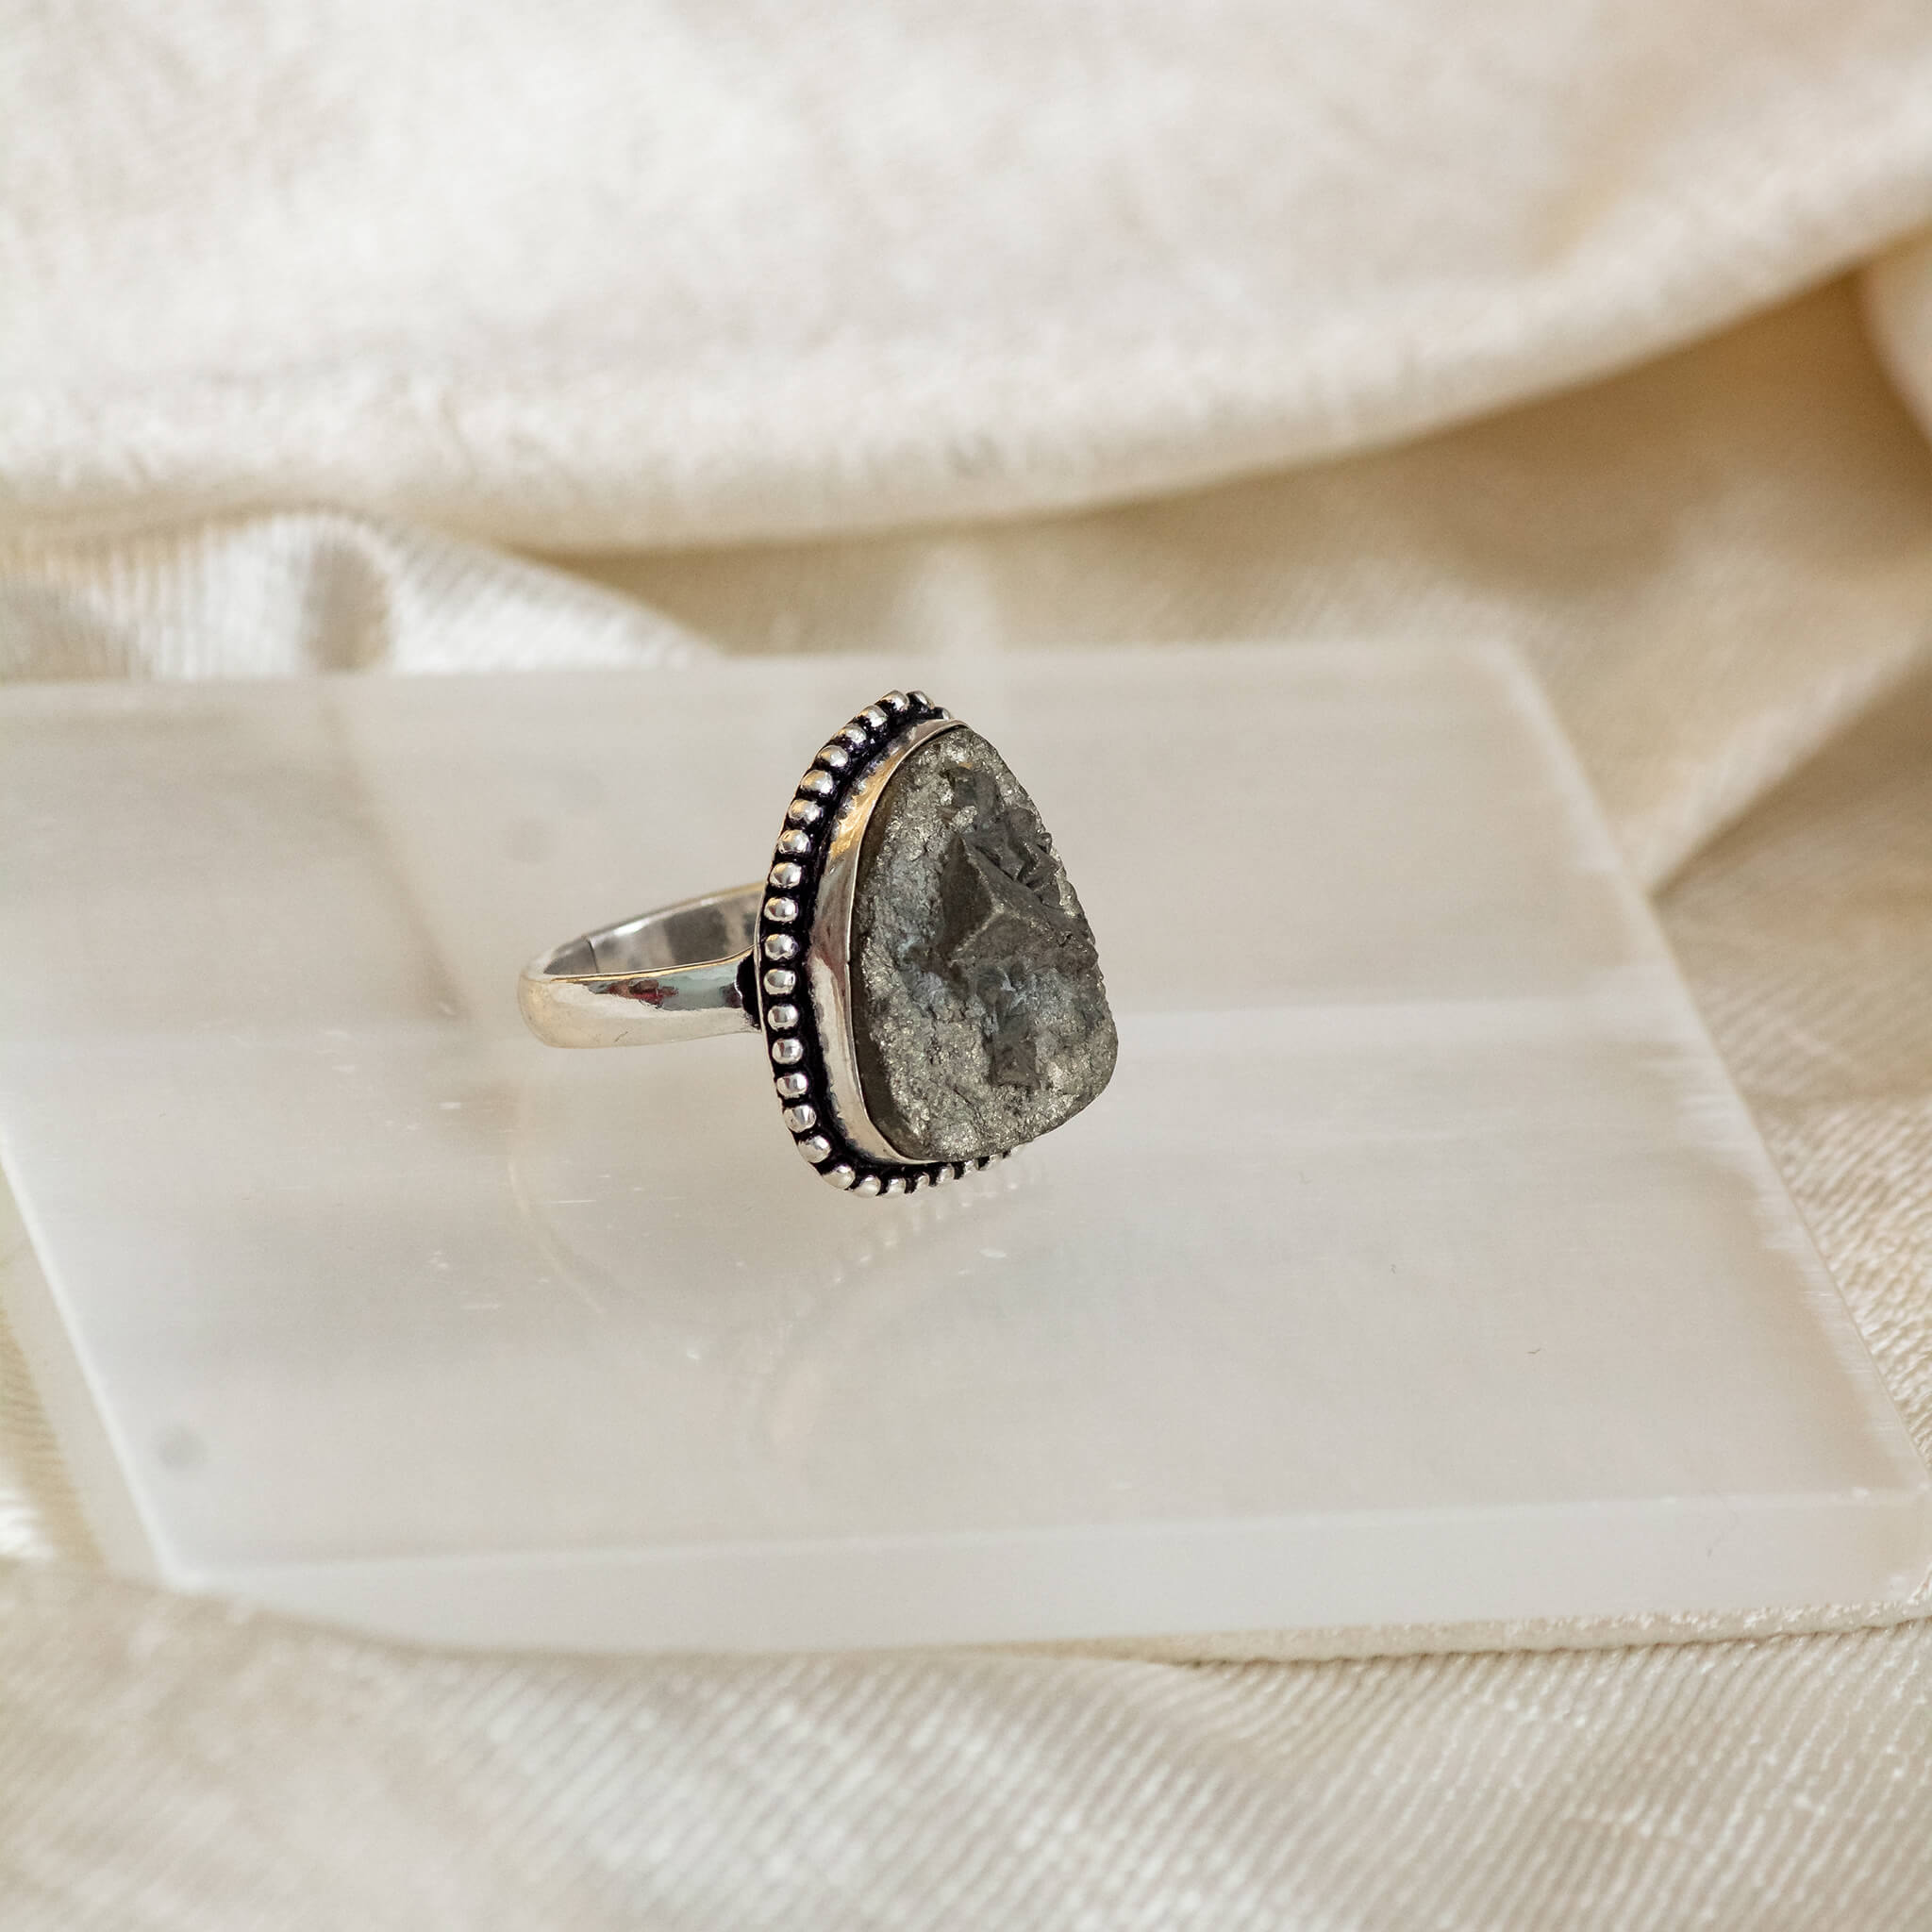 Rings | Fashionable Pyrite Stone Ring With Adjustable Size For Women Or Men  NEVER USED it For All 1. Captivating and unique, the pyrite stone ring. |  Freeup